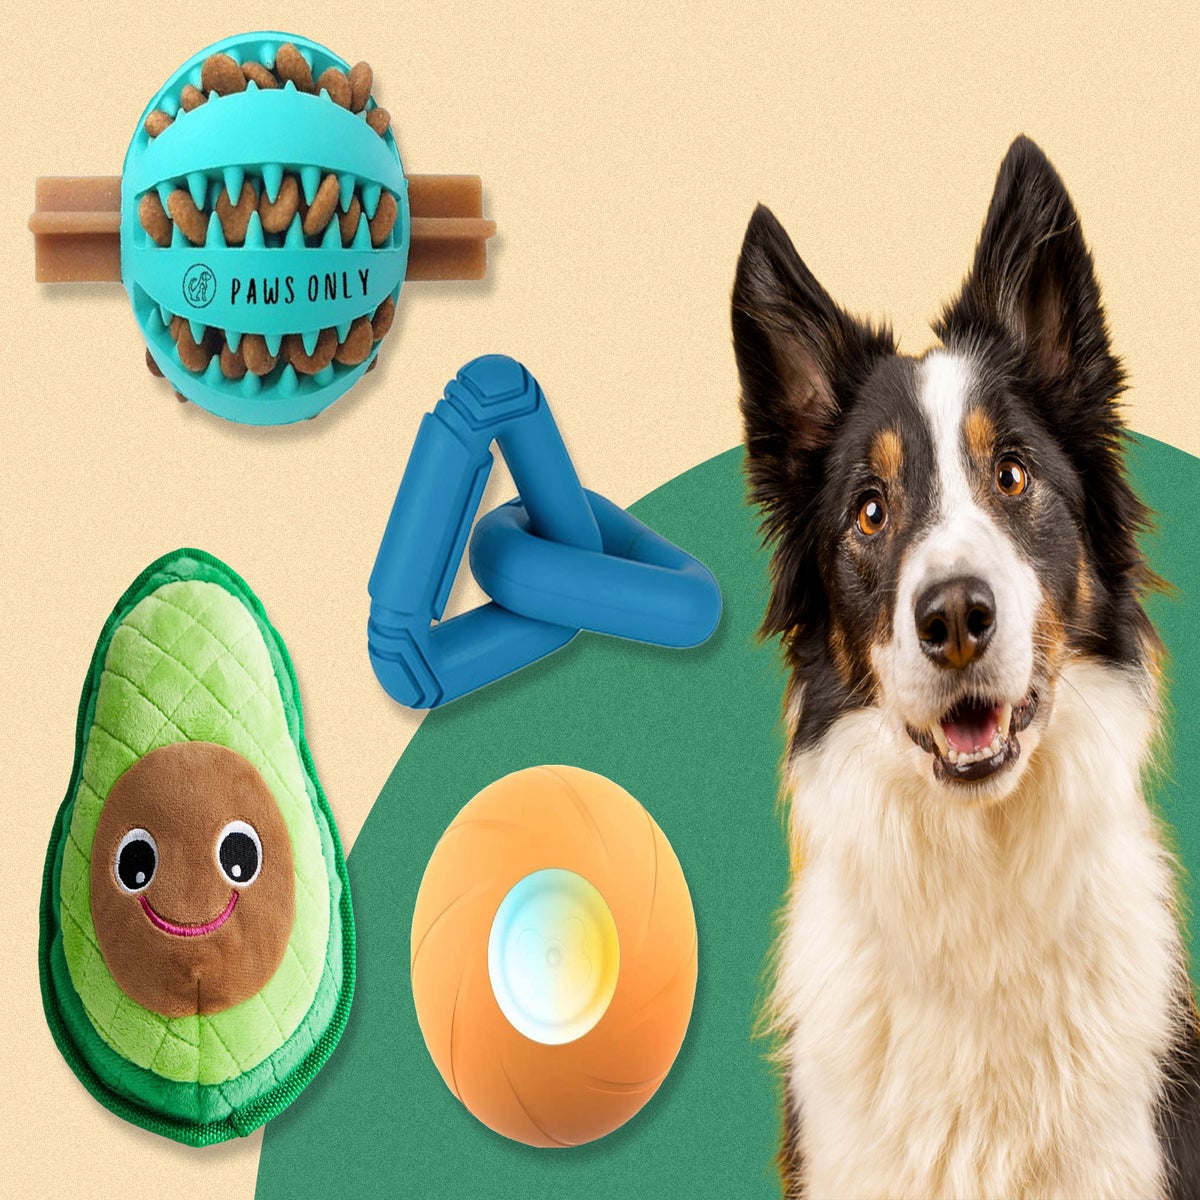 The Best Dog Exercise Equipment for Your Furry Friend: 8 Great